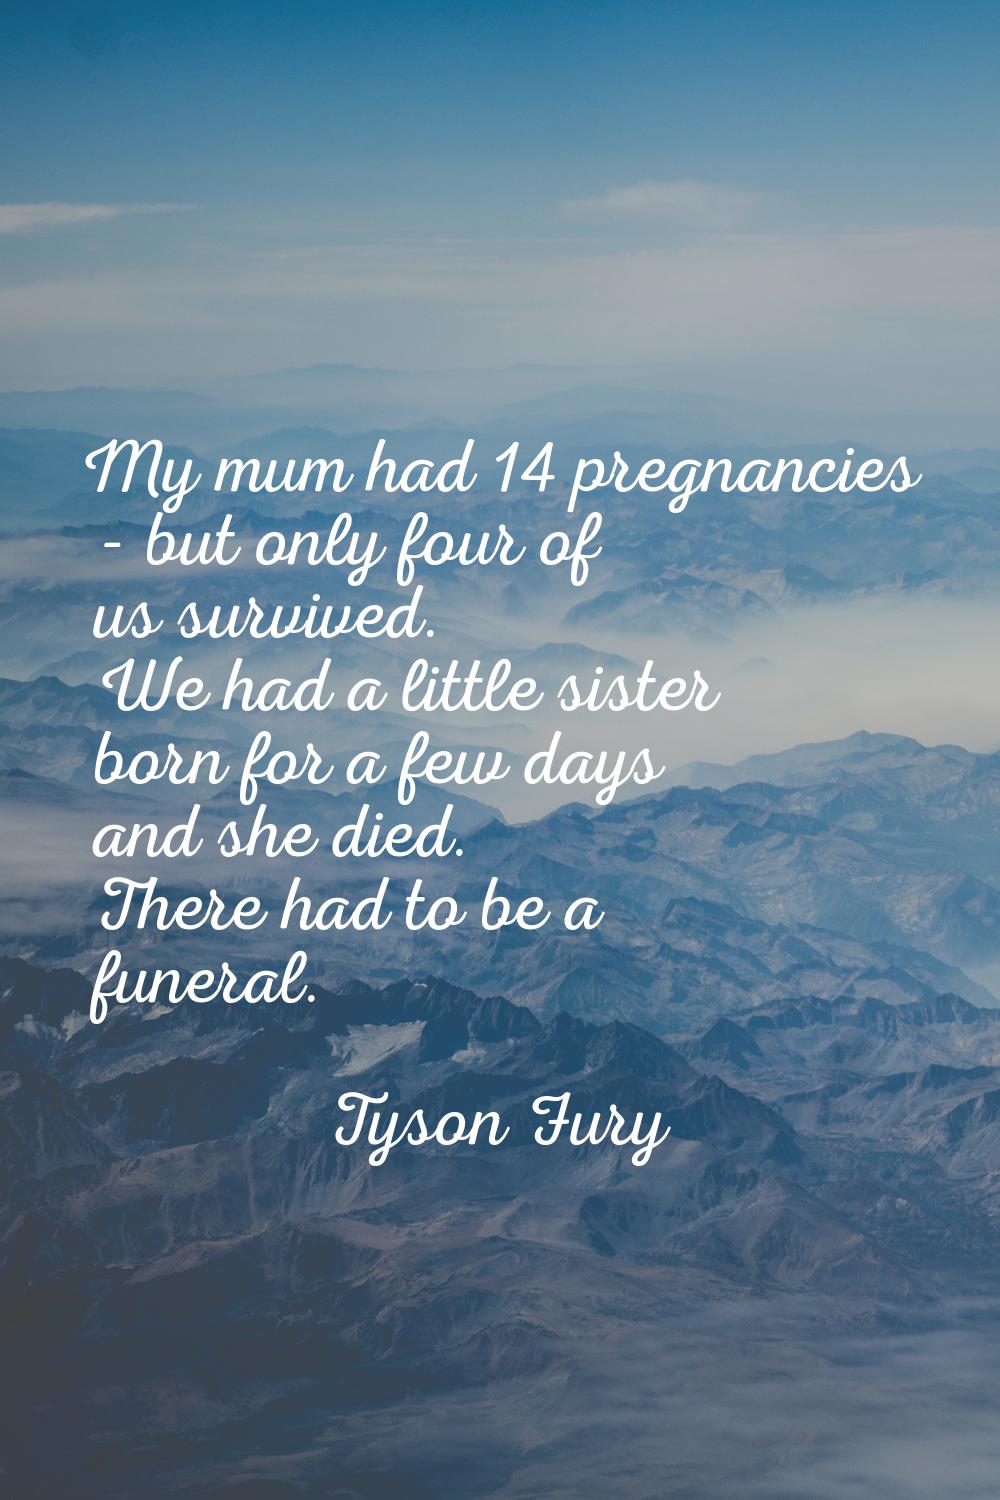 My mum had 14 pregnancies - but only four of us survived. We had a little sister born for a few day